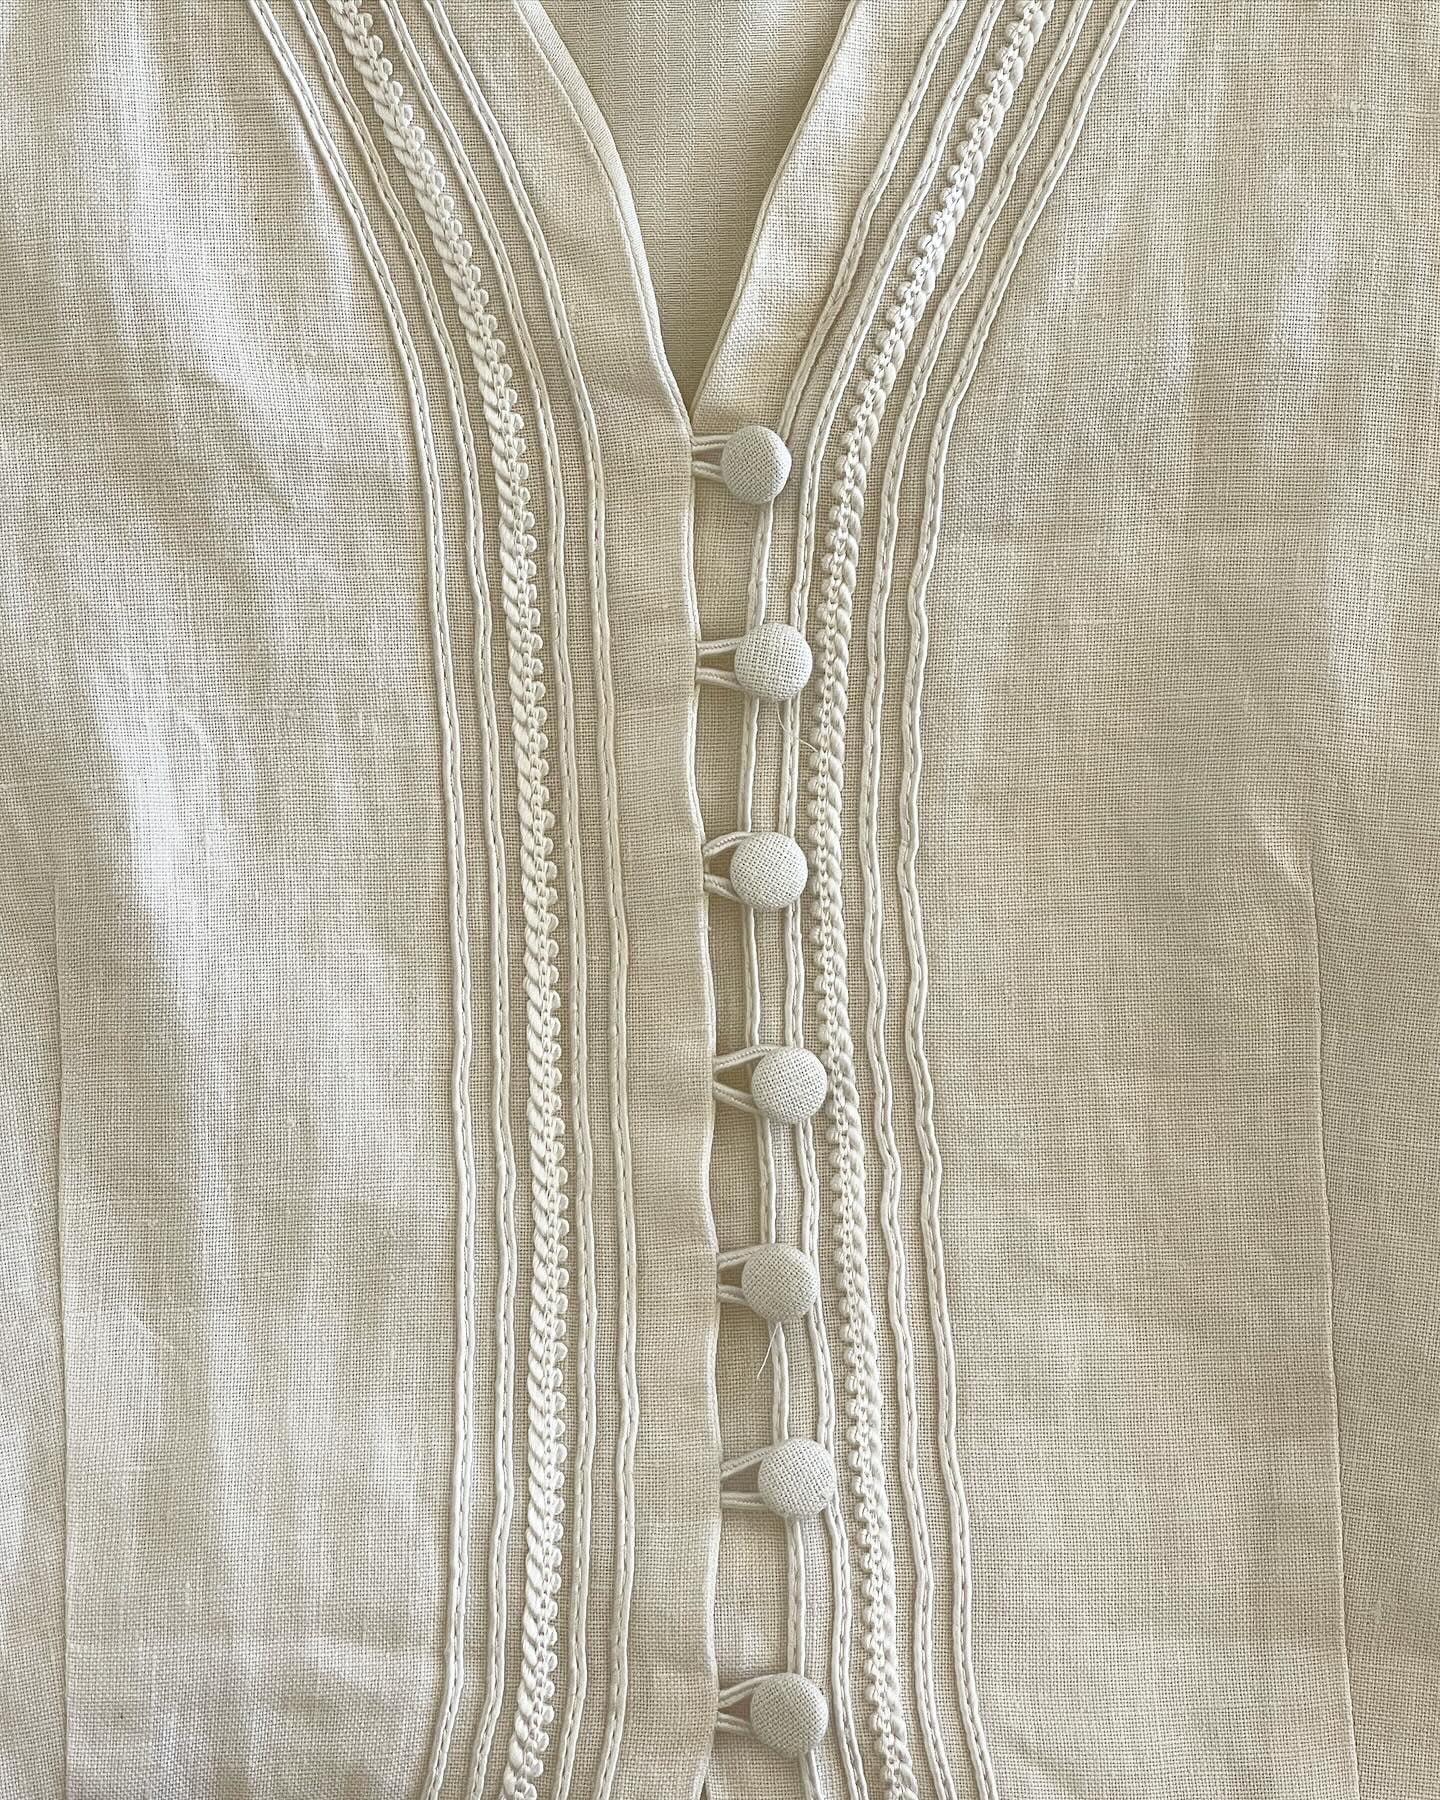 Lovely vintage linen waistcoat with decorative elements